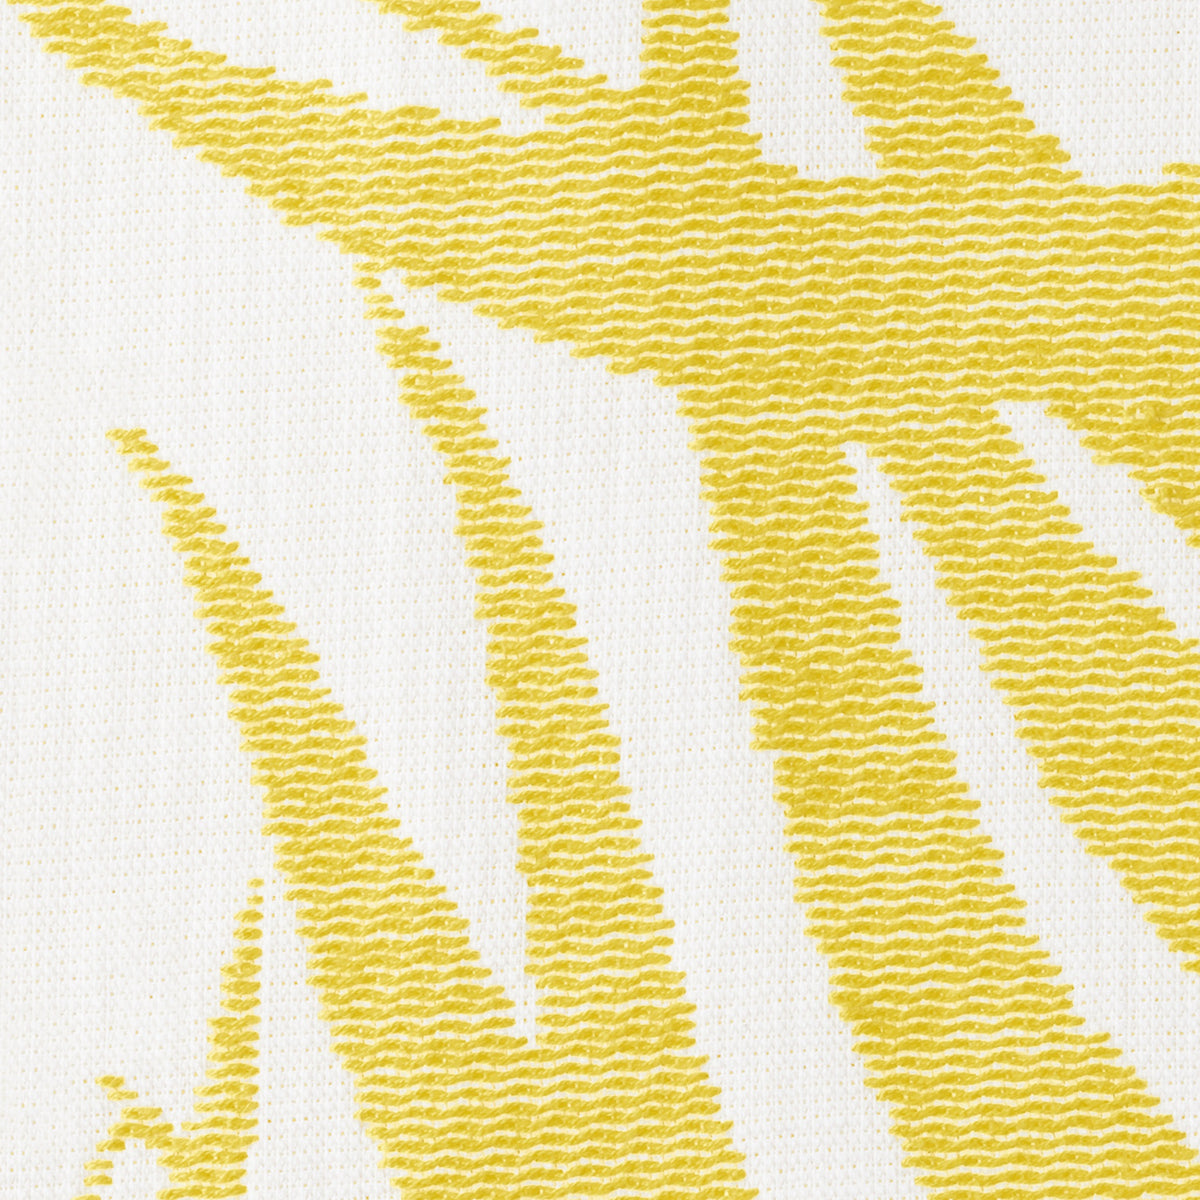 Swatch Sample of Matouk Zebra Palm Beach Towels in Color Canary